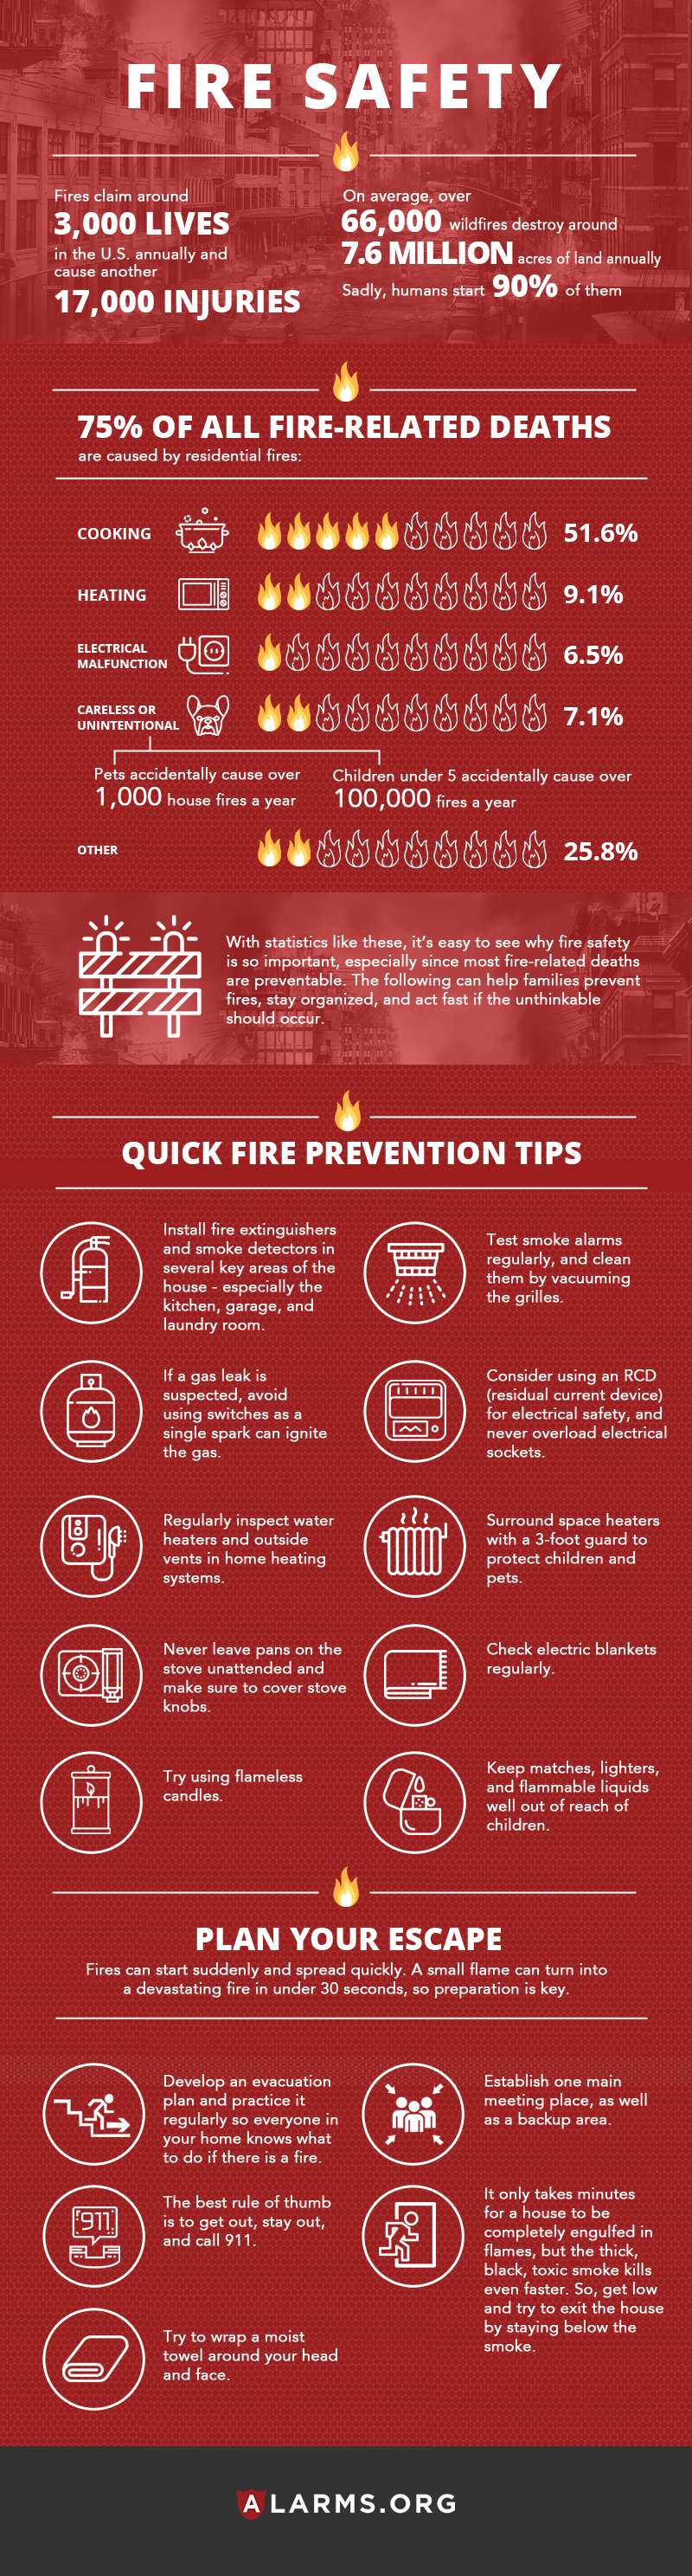 alt="Fire Safety Guide with Quick Fire Prevention Tips, Escape Plans and Fire Fact. All Information listed out on page"